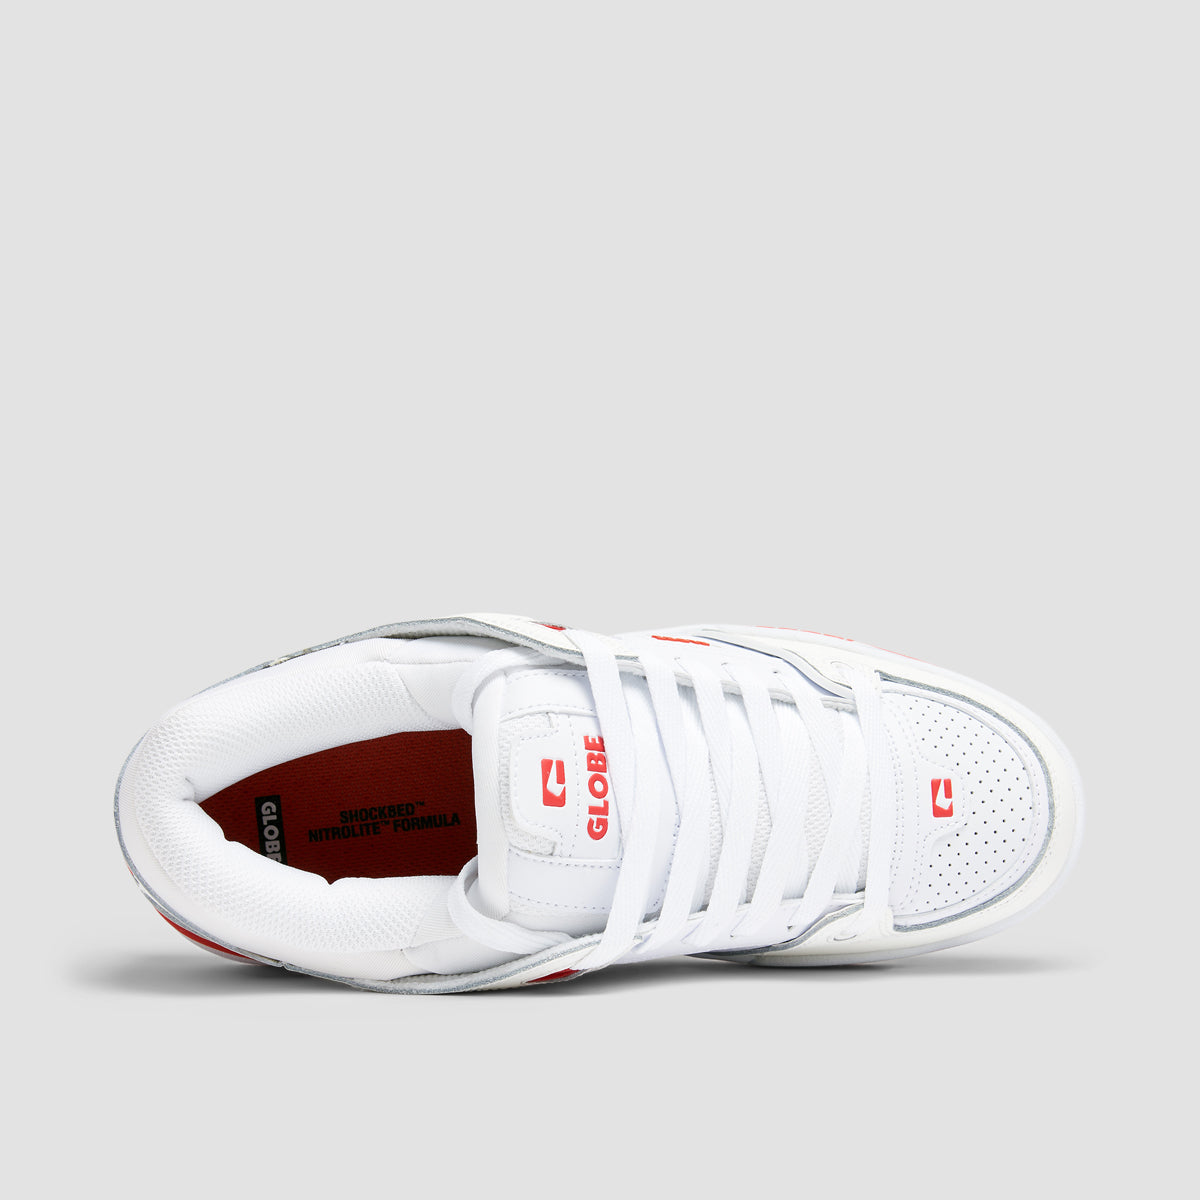 Globe Fusion Shoes - White/Red